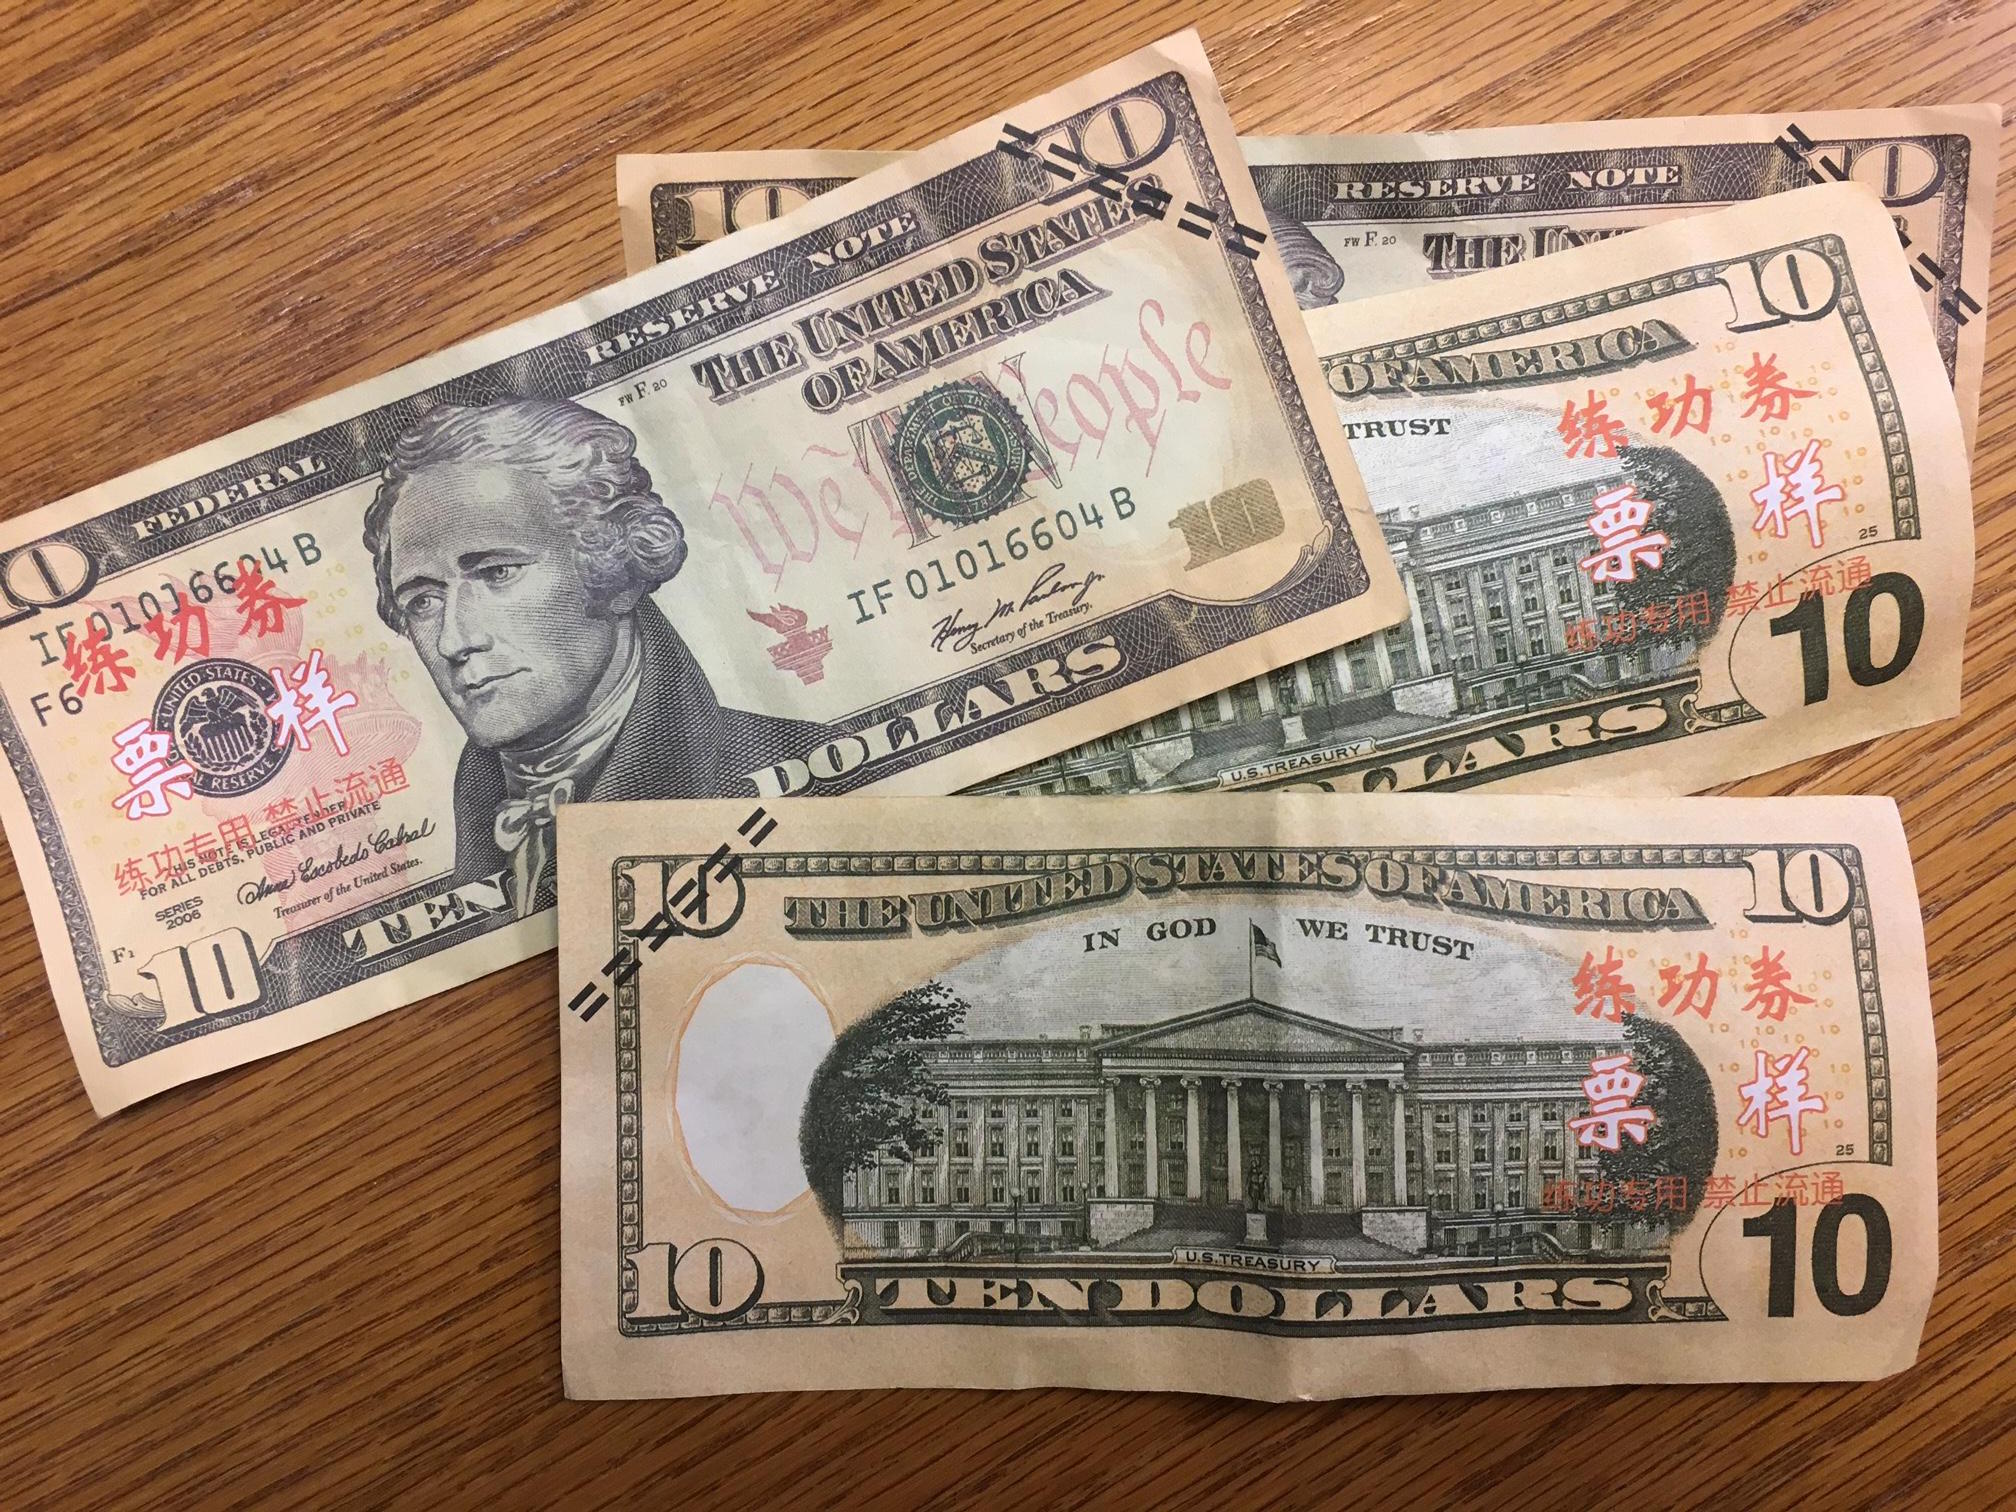 Counterfeit money with Chinese letters found in Kingman | The Daily Courier | Prescott, AZ